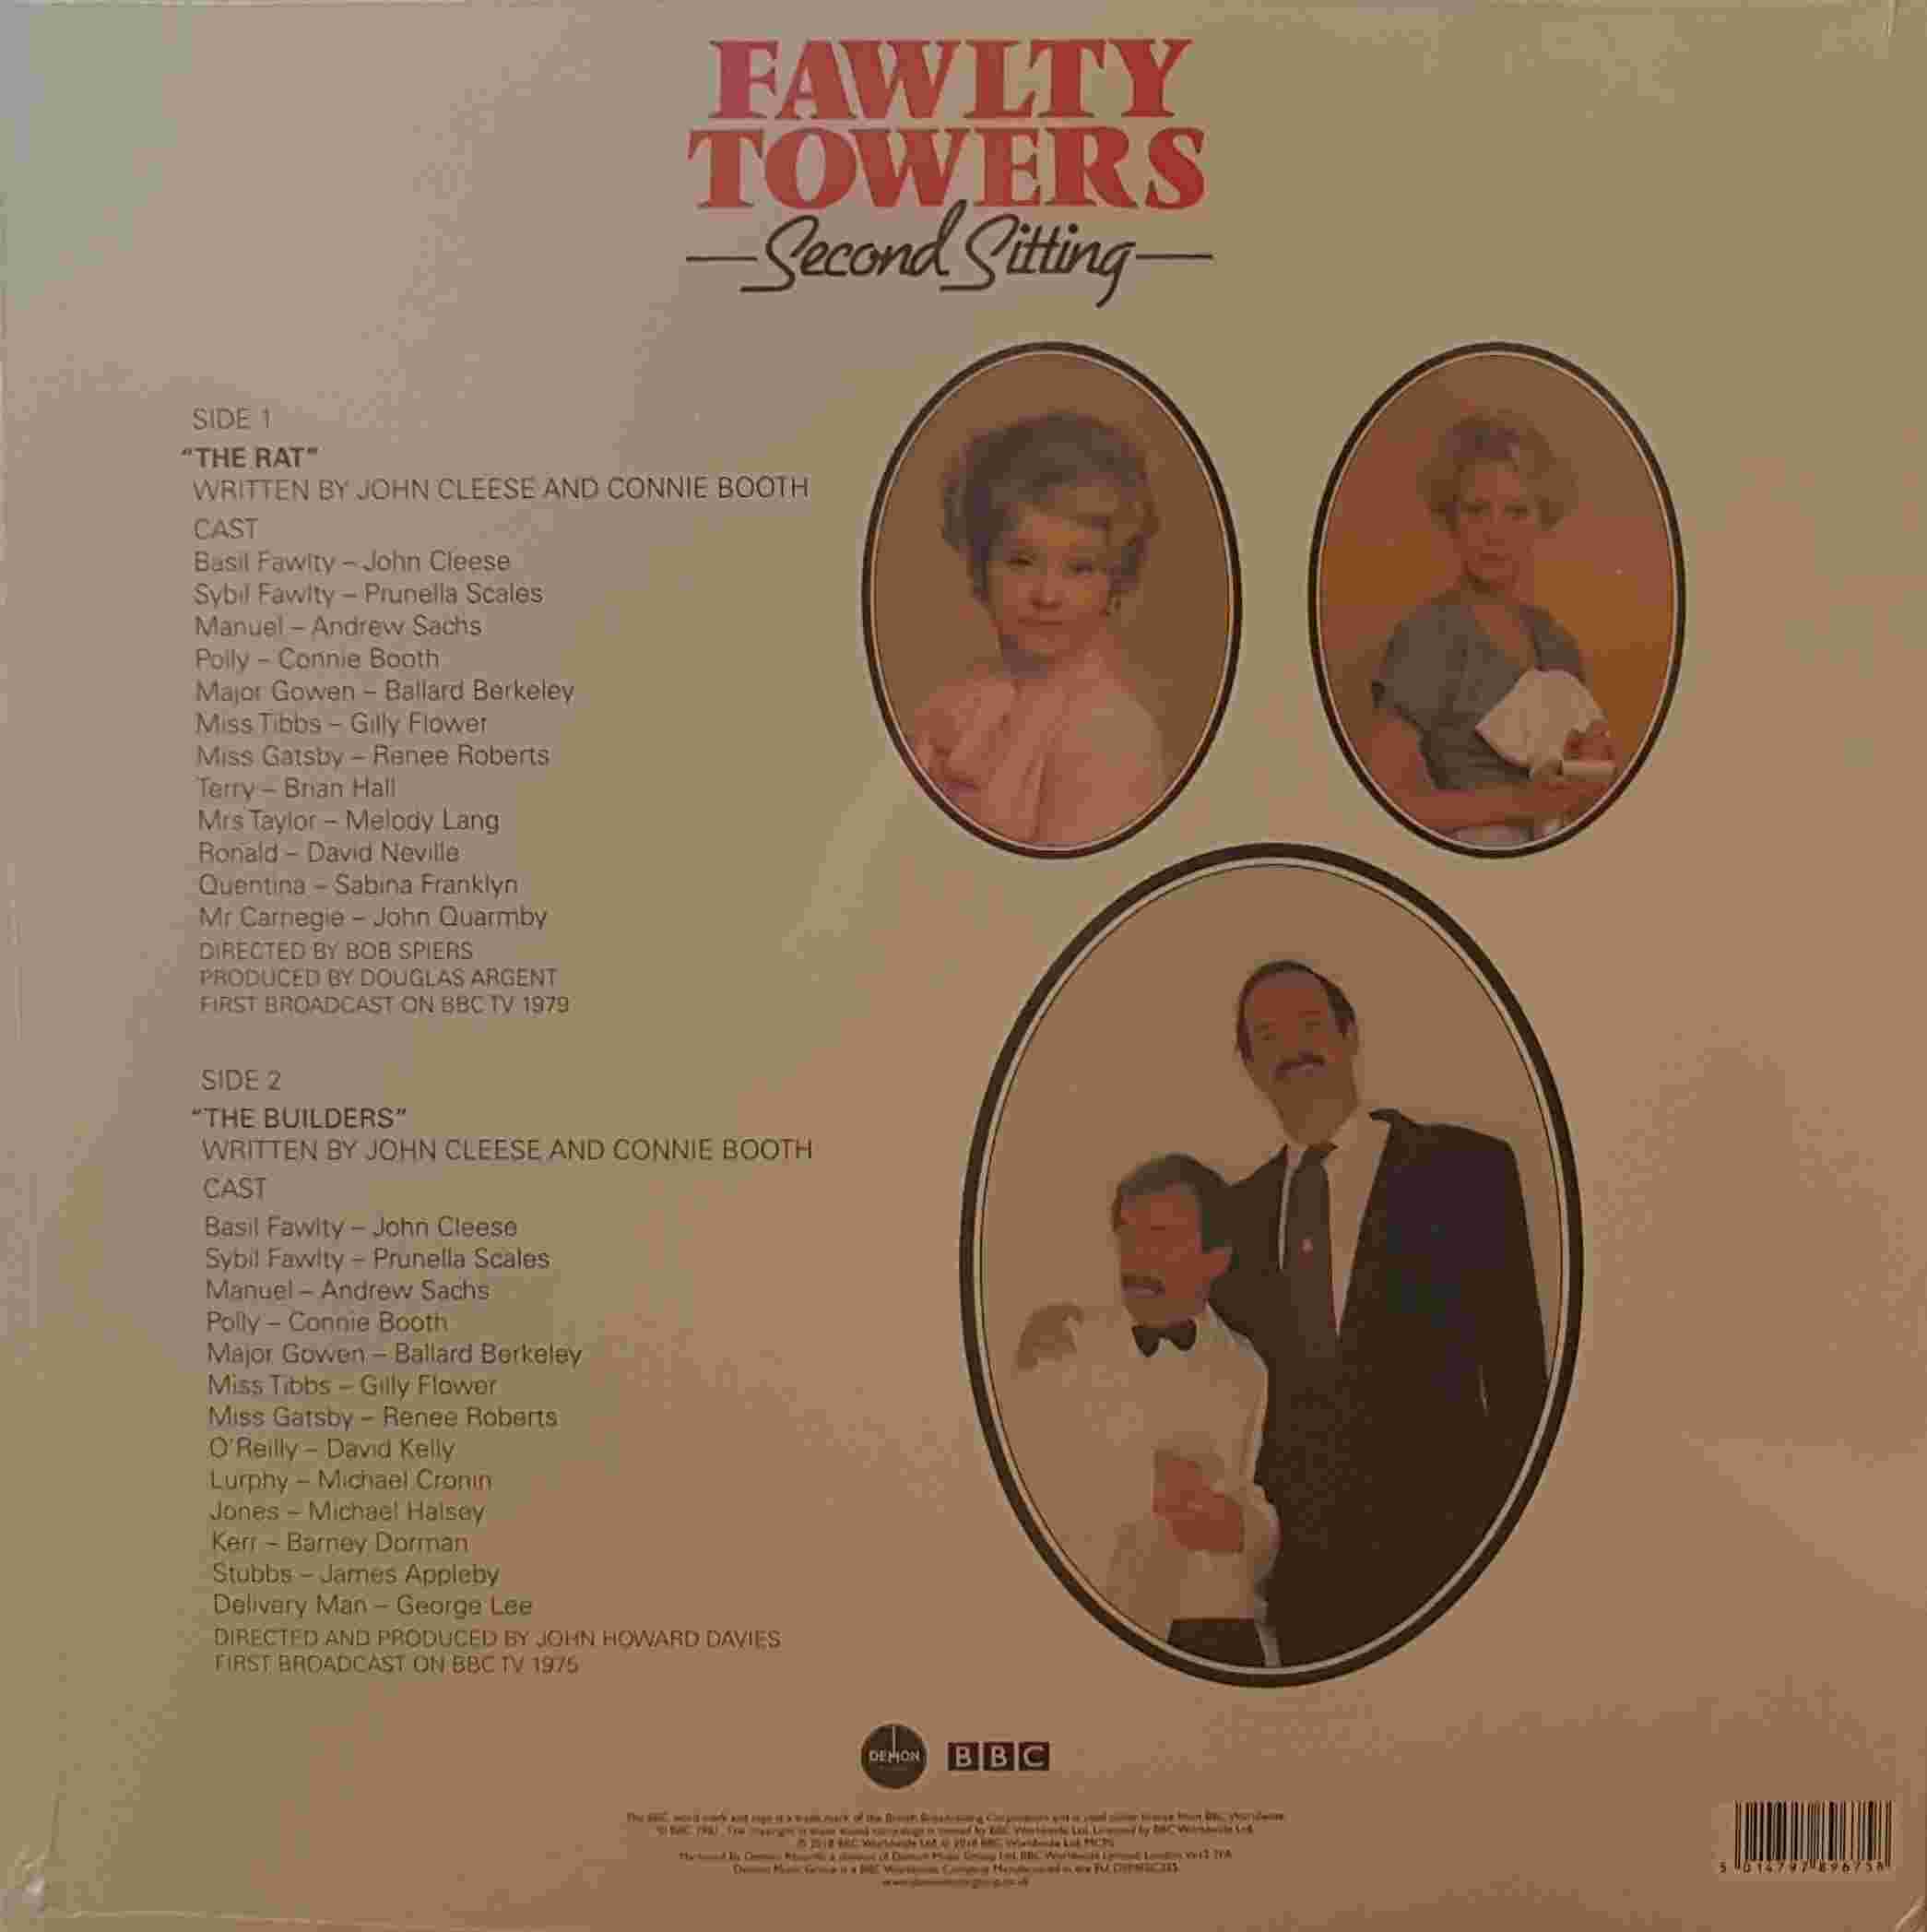 Picture of DEMREC 255 Fawlty Towers - Second sitting - Record Store Day 2018 by artist John Cleese / Connie Booth from the BBC records and Tapes library